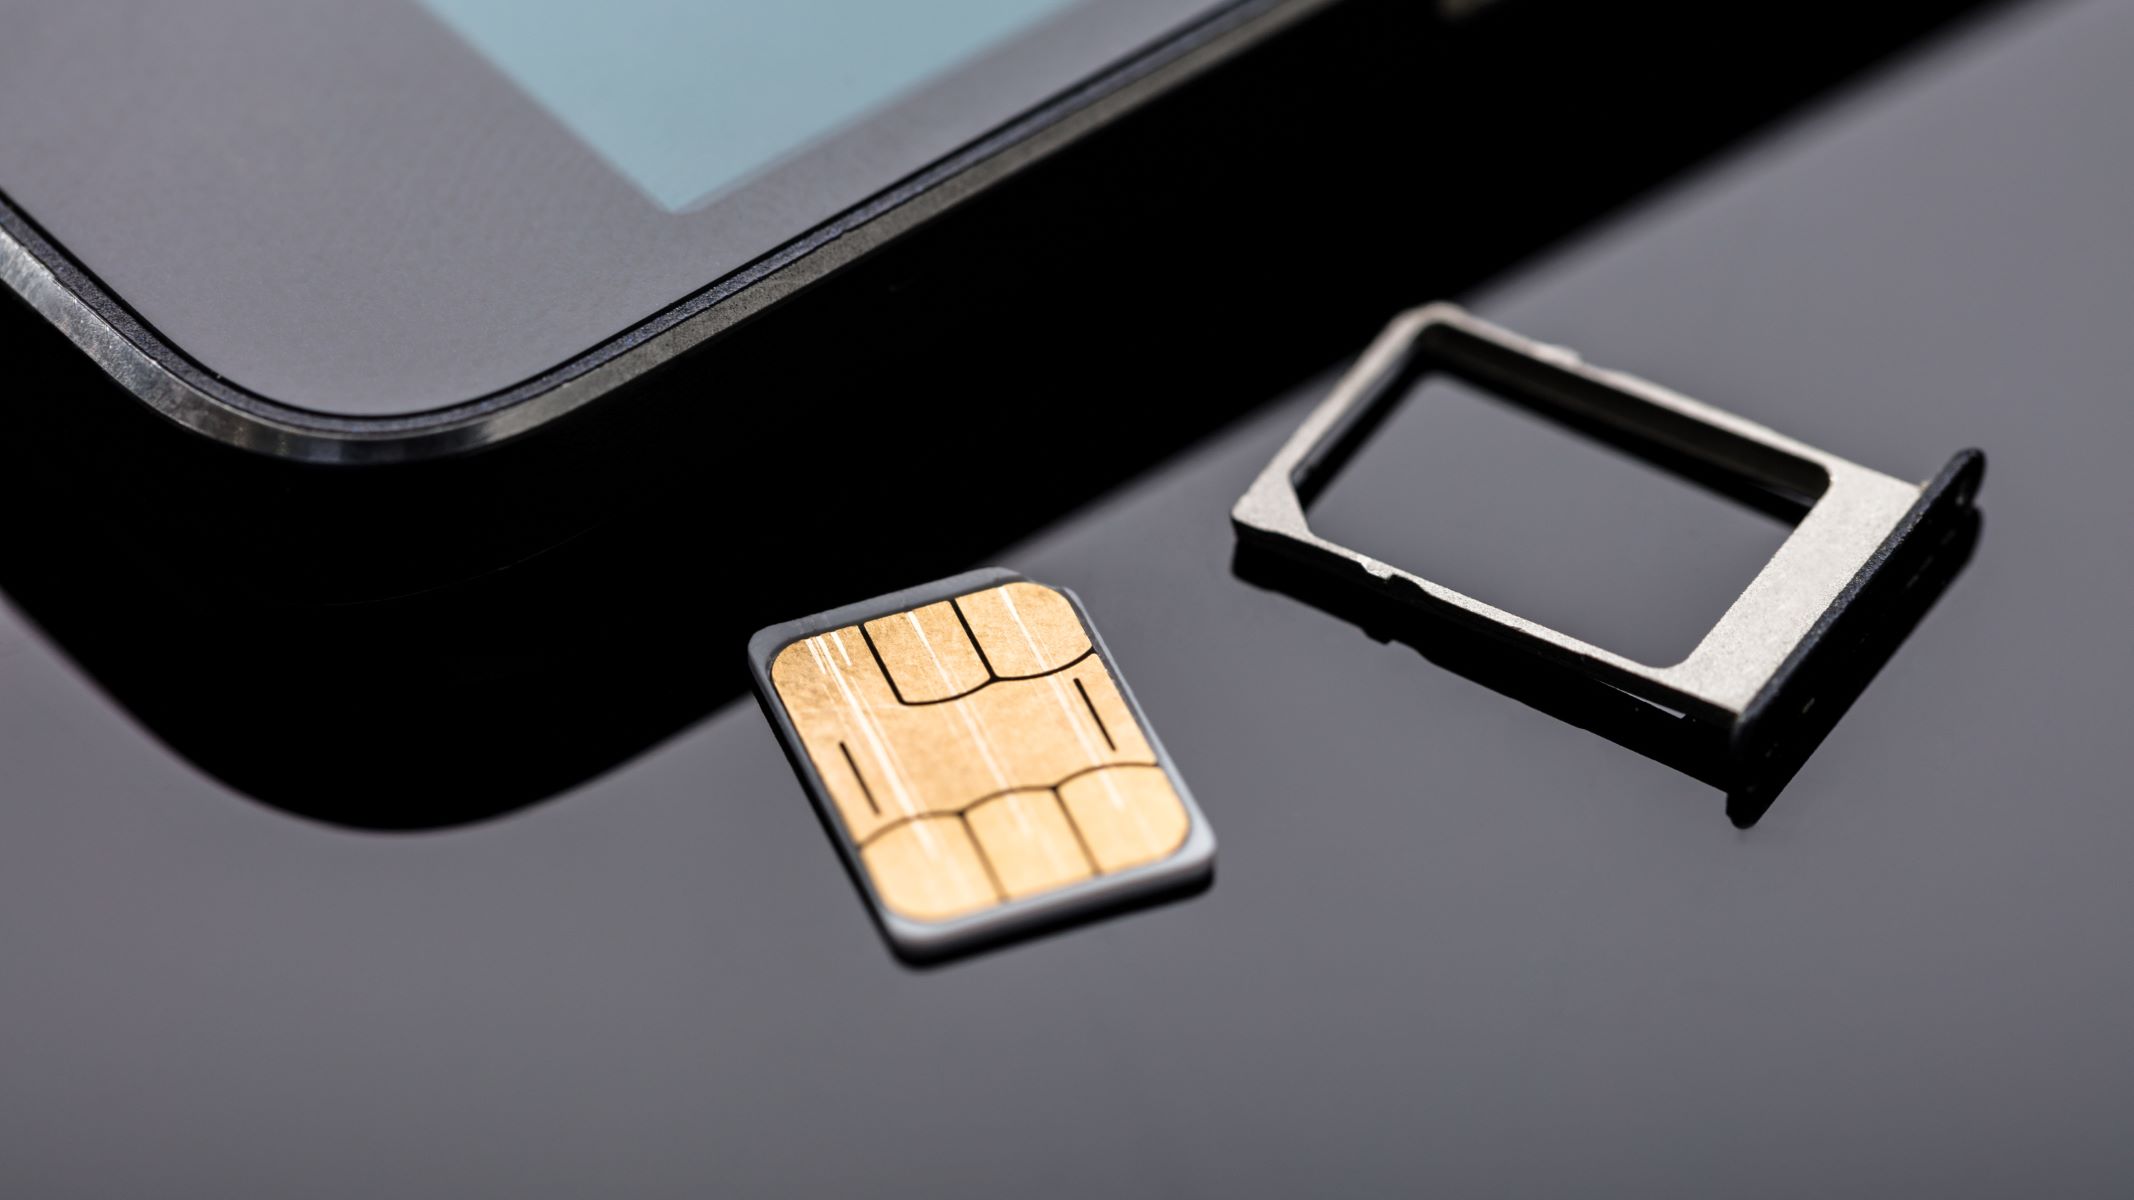 inserting-a-sim-card-into-iphone-se-step-by-step-guide